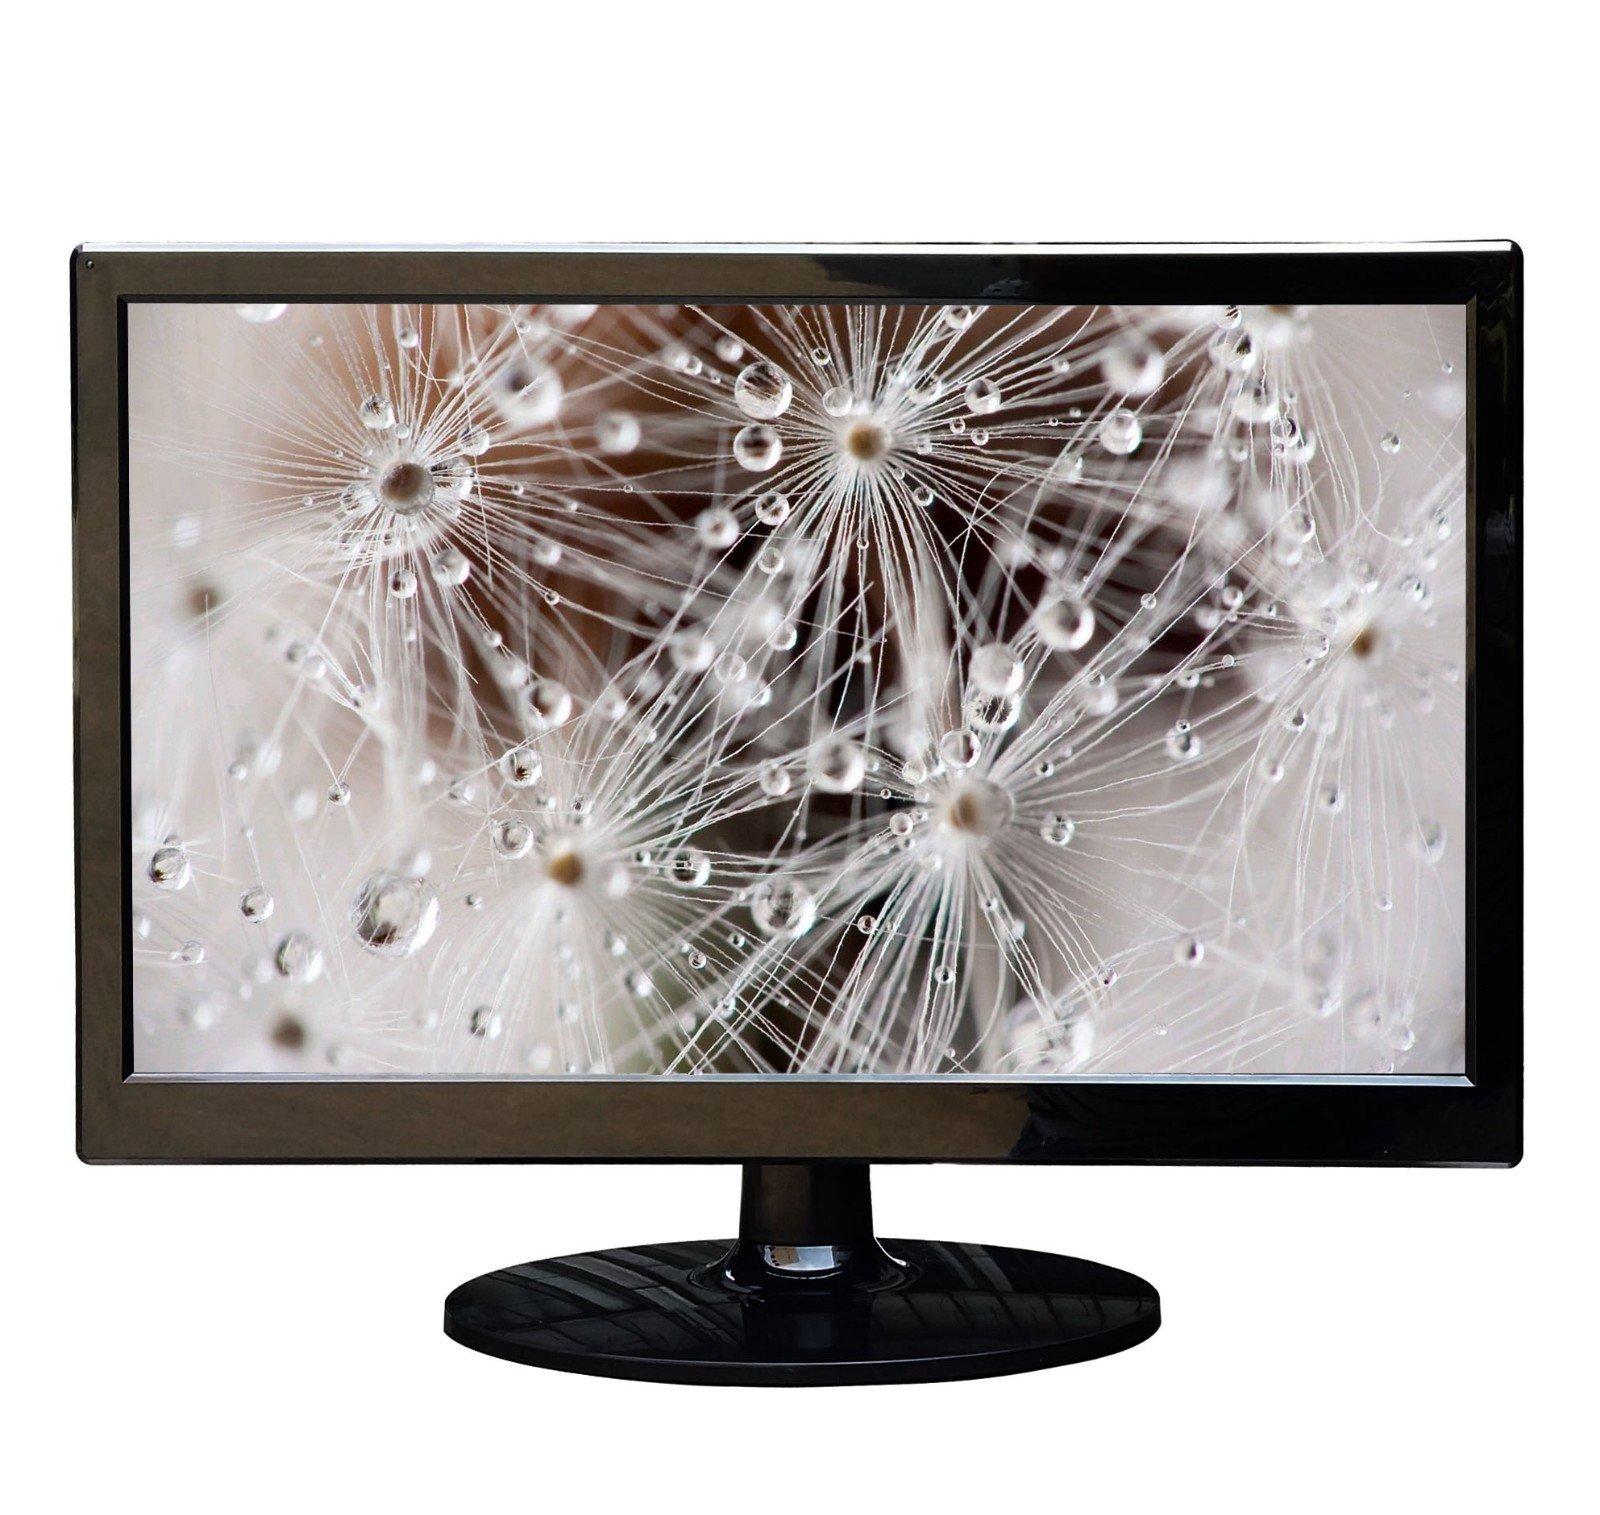 full hd display monitor 18.5 inch price with slim led backlight for lcd tv screen